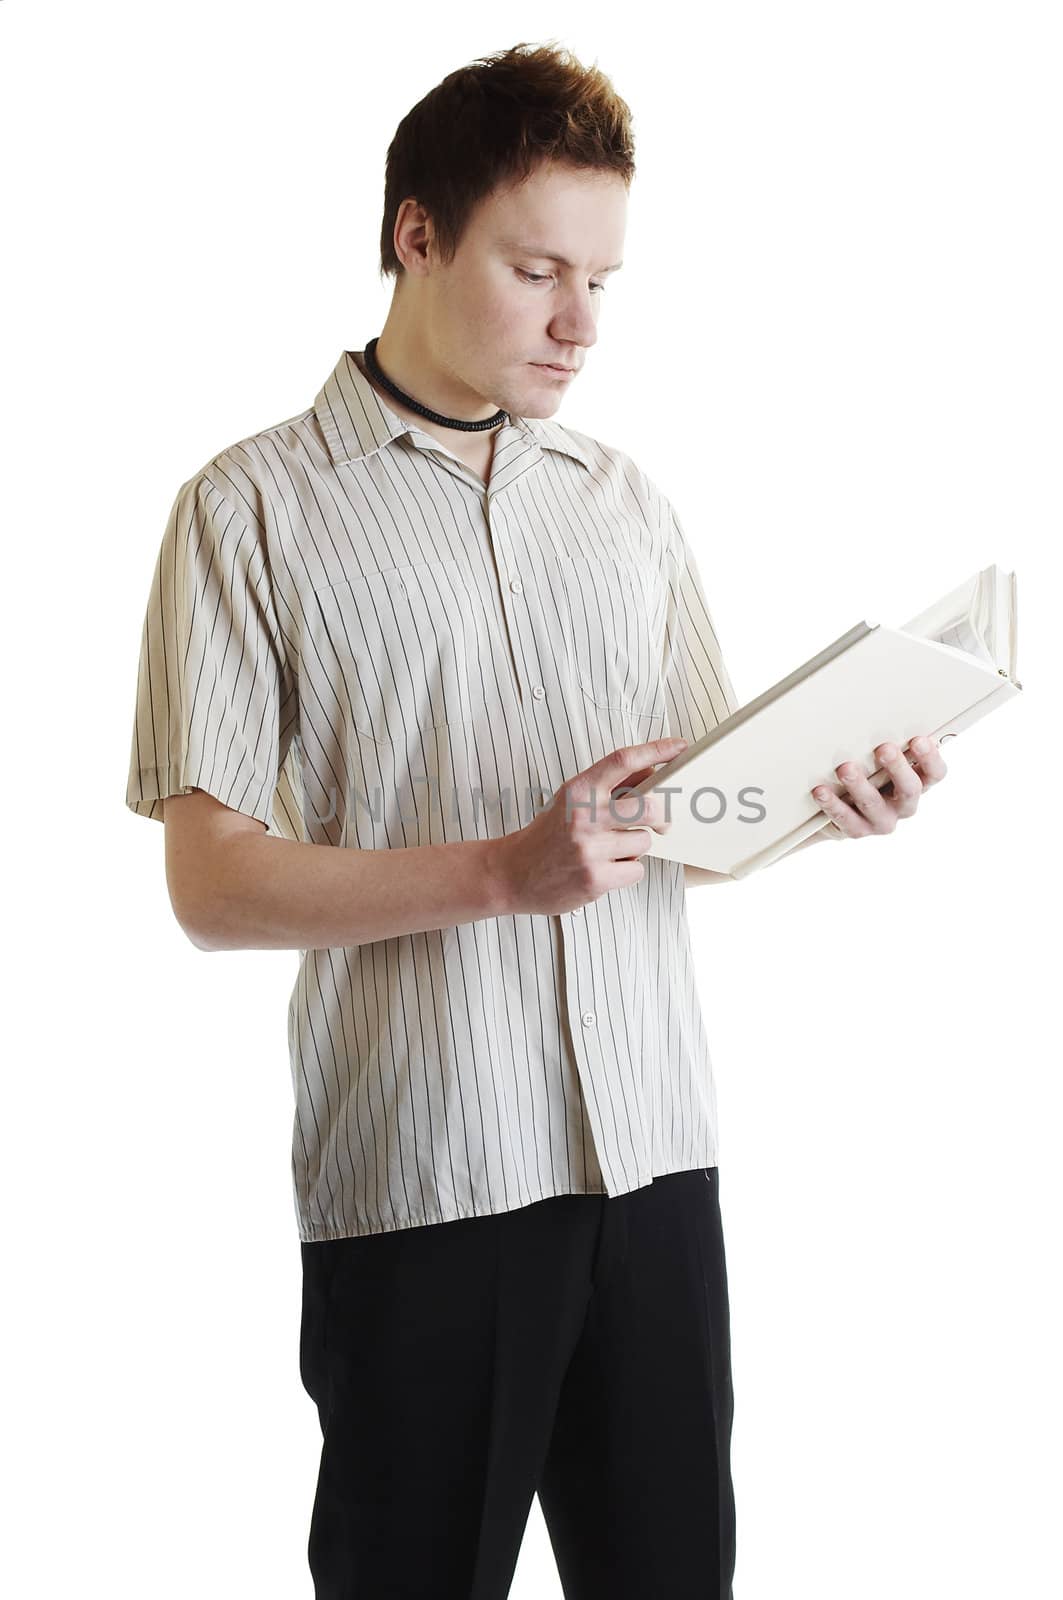 Isolated university student holding a chemistry book